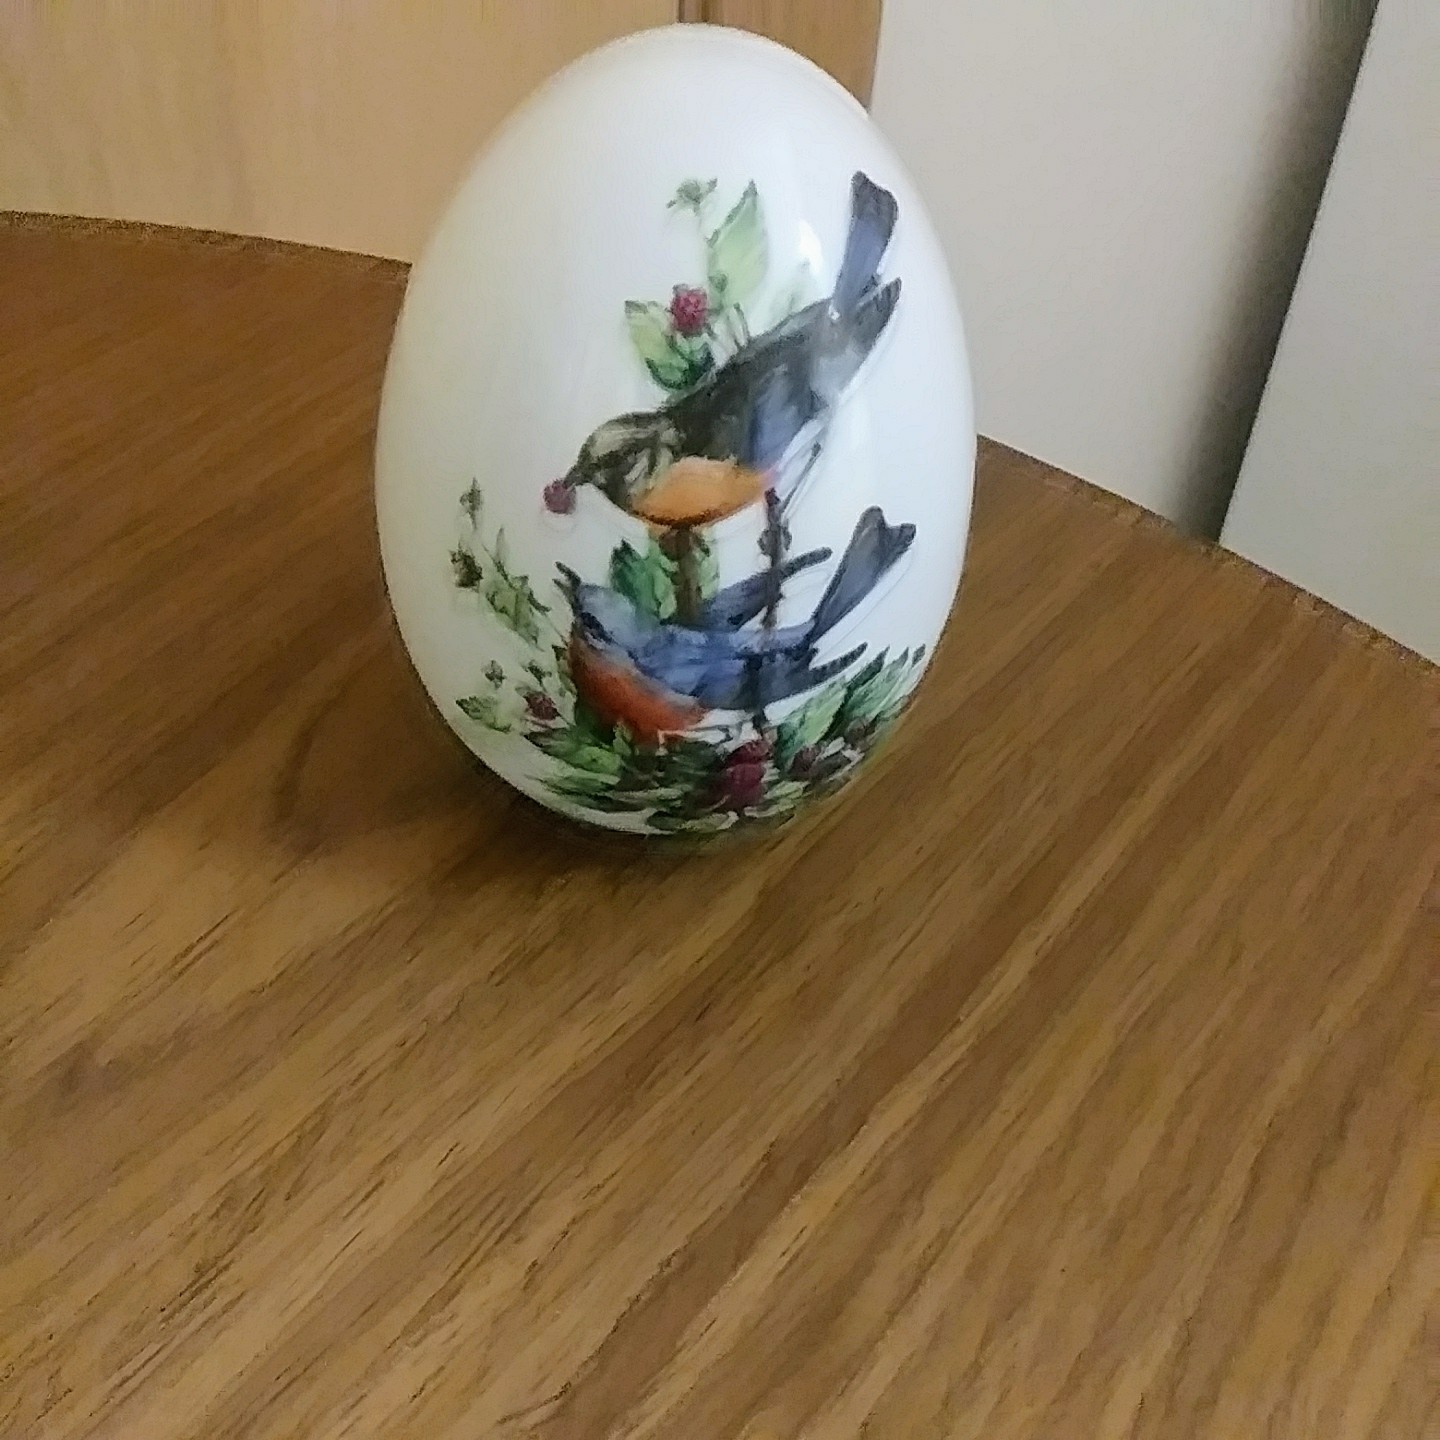  AVON Porcelain Egg 1984 " Summer’s Song is Warm and Bright" Figurine       - £5.98 GBP